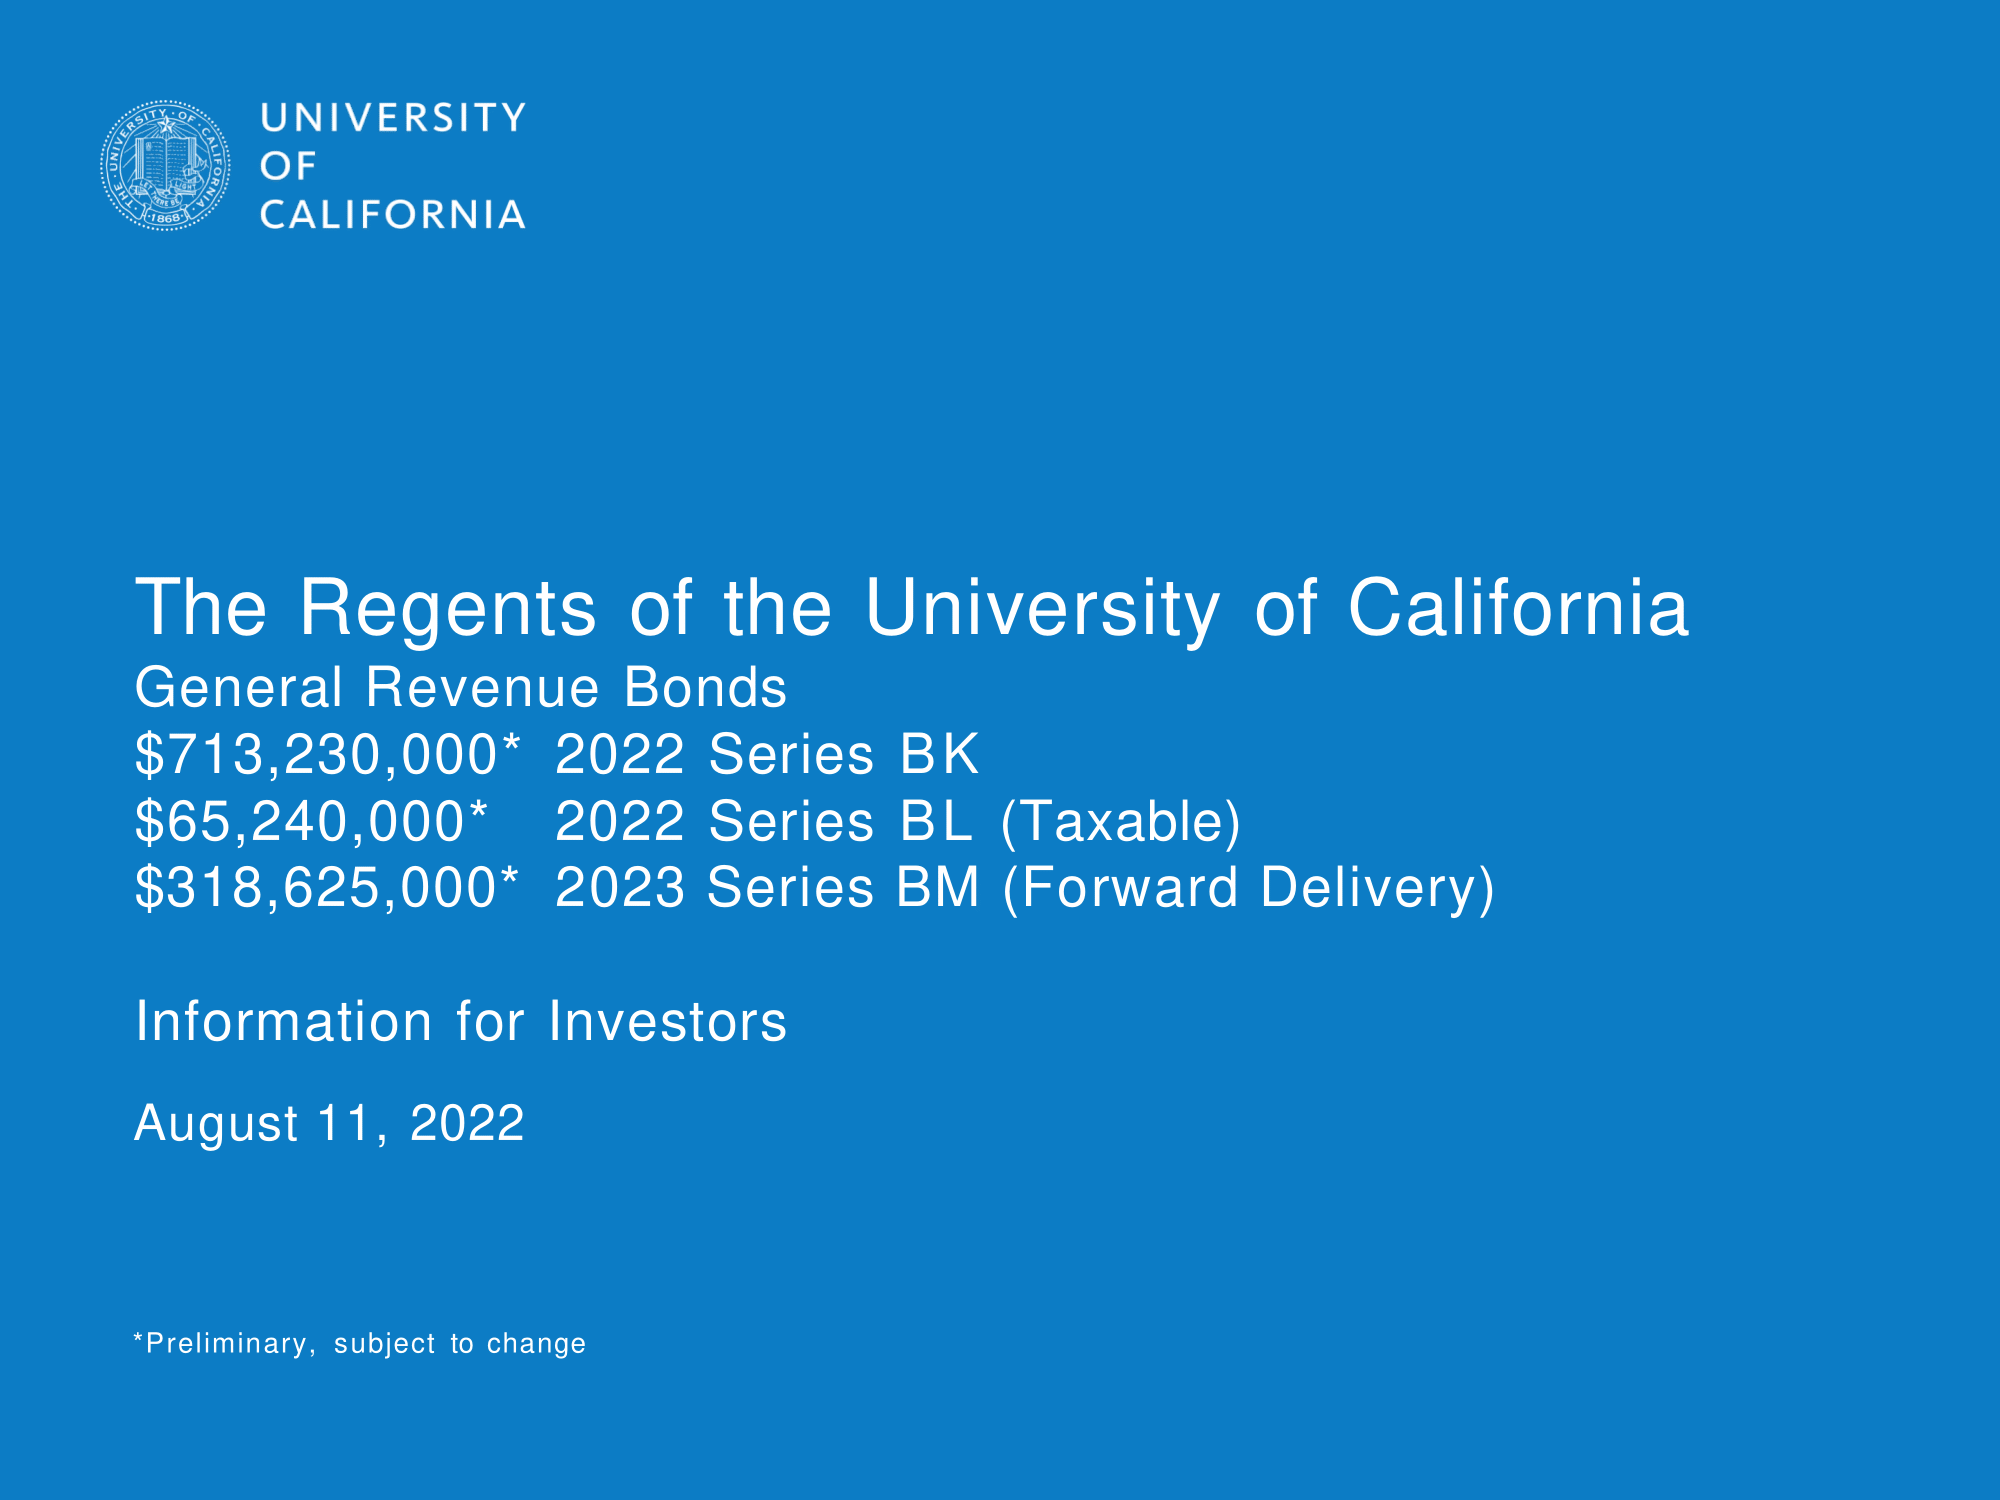 The Regents of the University of California, General Revenue Bonds 2022 Series BK, 2022 Series BL (Taxable), and 2023 Series BM (Forward Delivery) Information for Investors